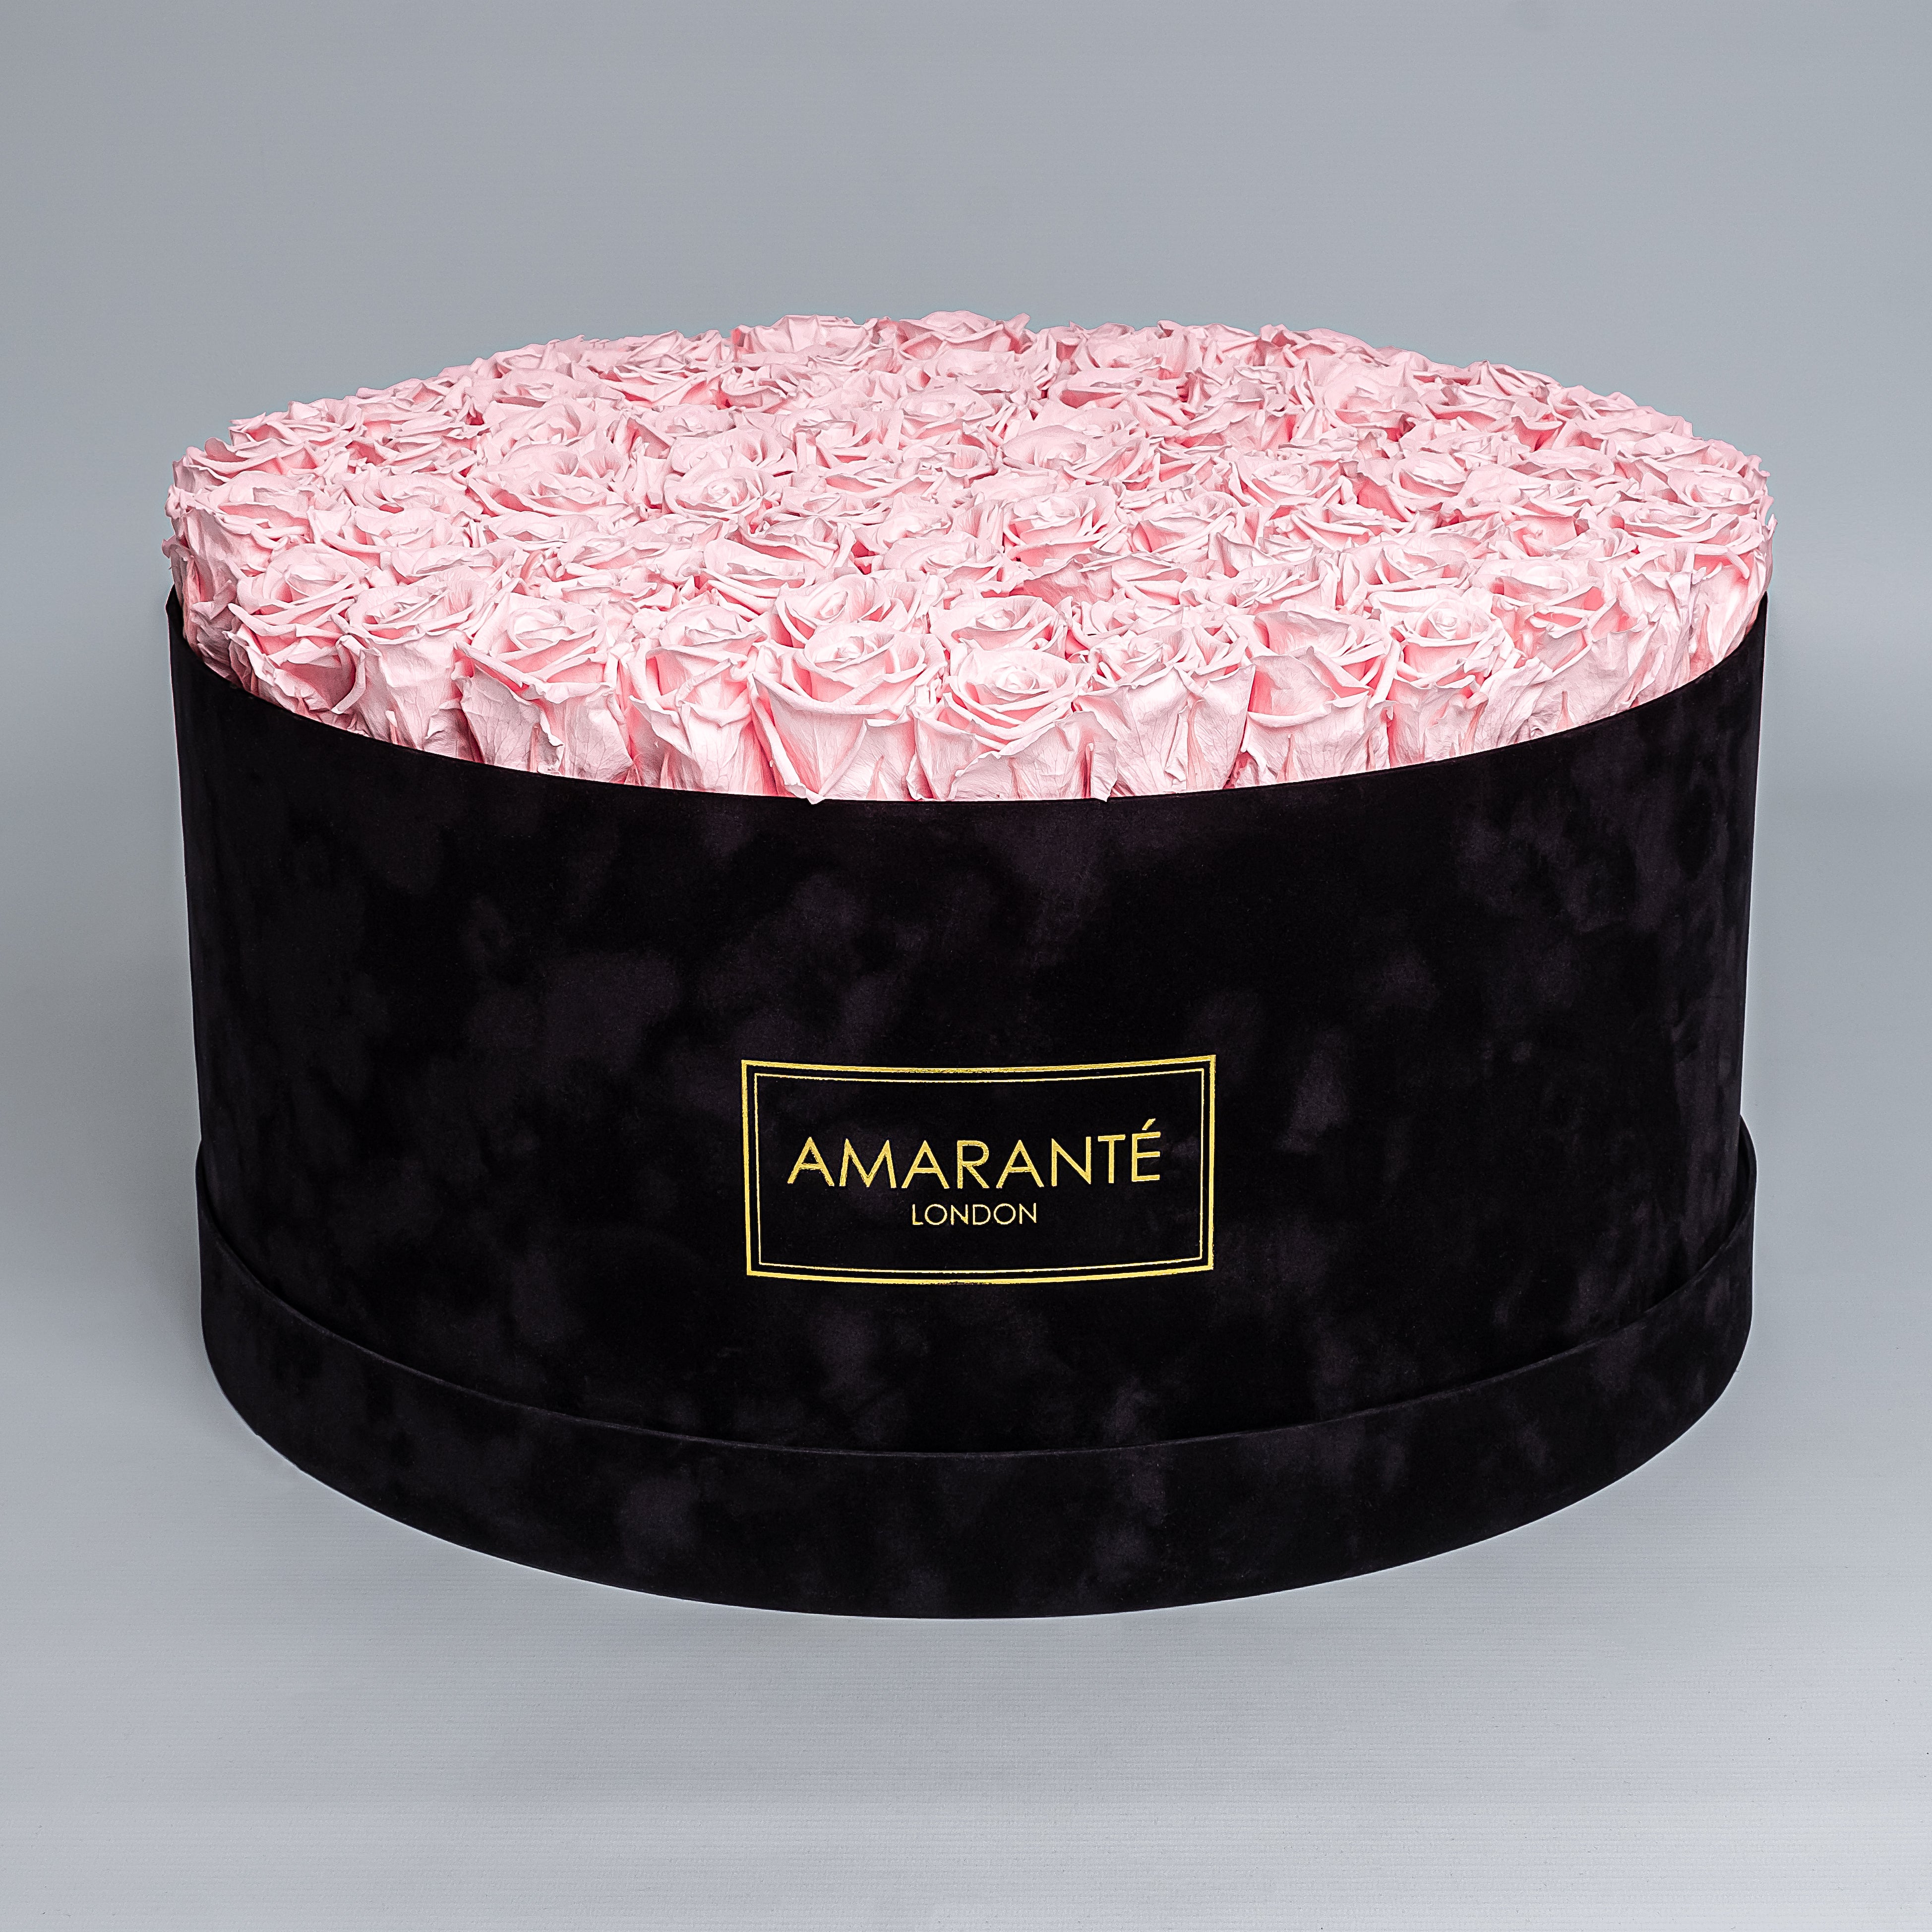 Luxurious black suede rose box filled with enchanting pink infinity roses showcasing refined style and grace. Ideal for family and friends that appreciate trendy and classy gifts on special occasions. Free UK Delivery.